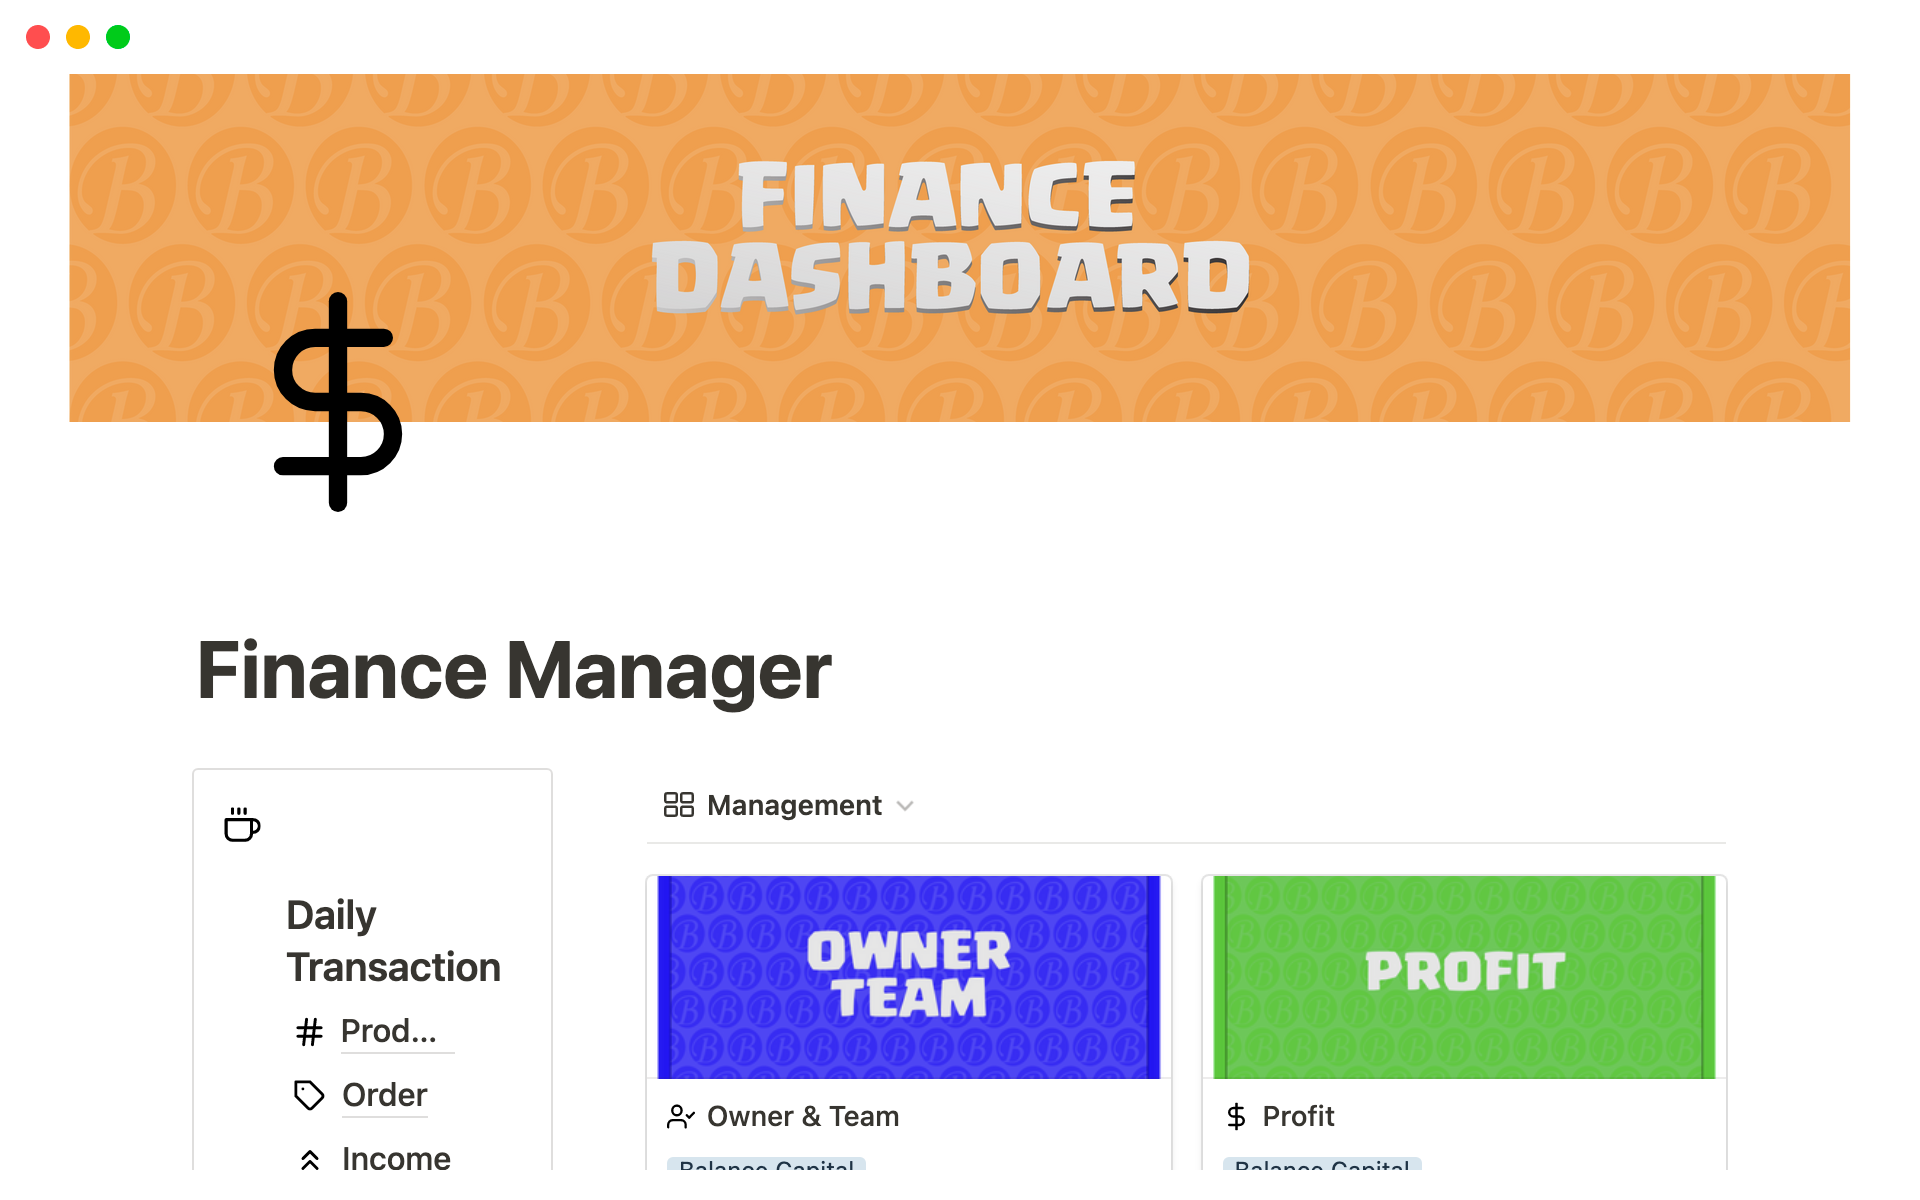 Finance OS Notion Dashboard is a tool that helps individuals and businesses manage their financial tasks and information in one central location.